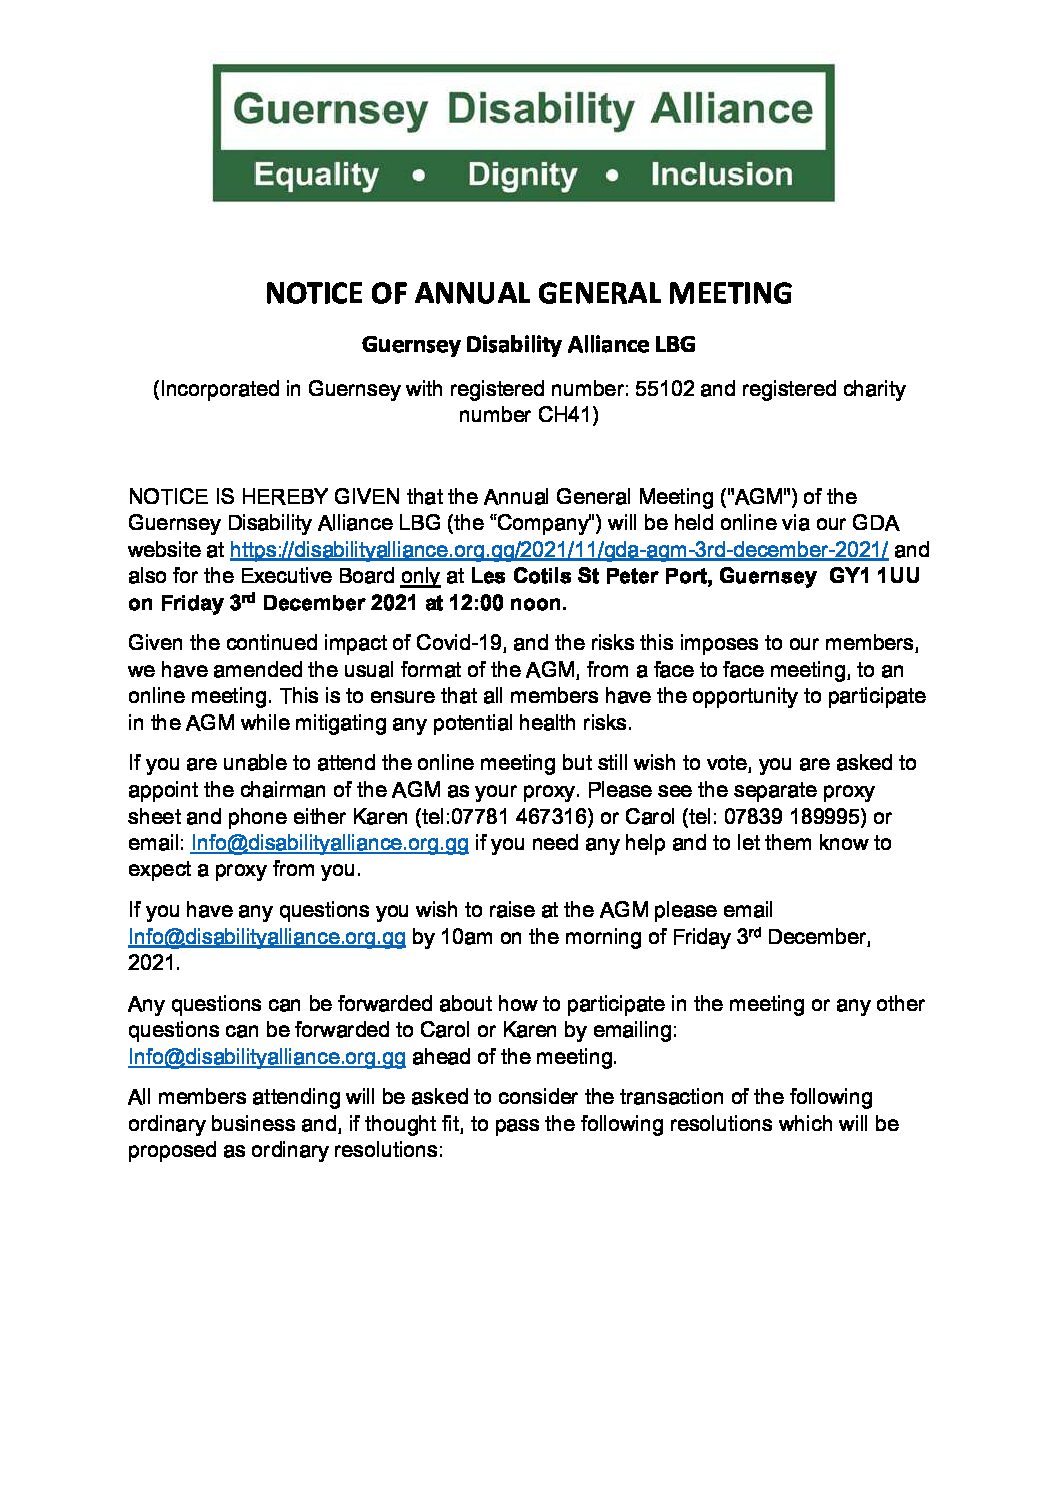 Agenda and proxy voting forms for the GDA's AGM on 3rd December 2021.